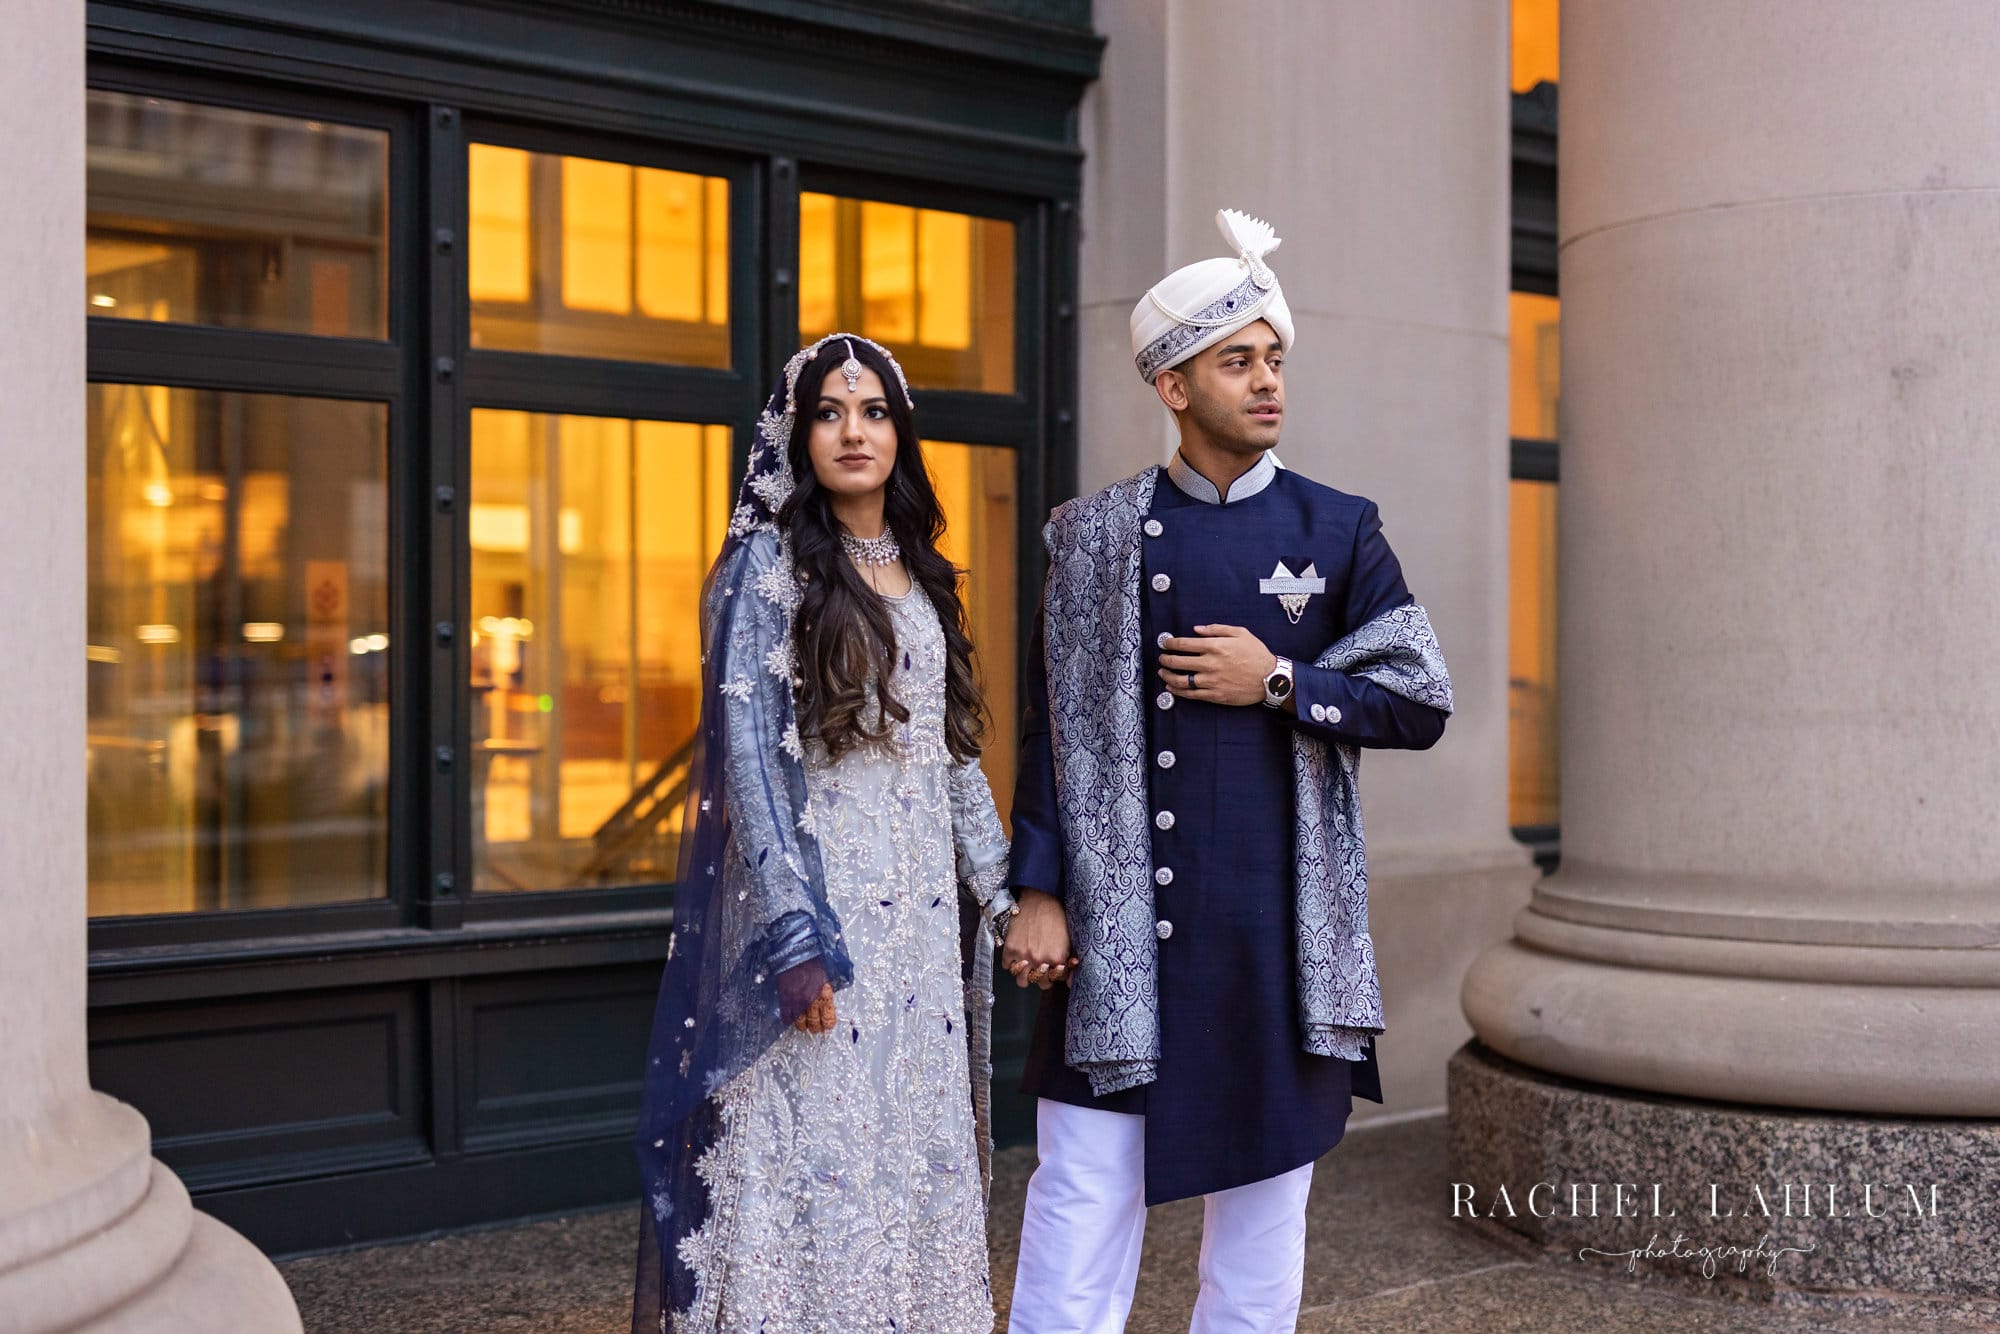 Couple in ceremonial South Asian wedding attire stands in front of St. Paul Union Depot.